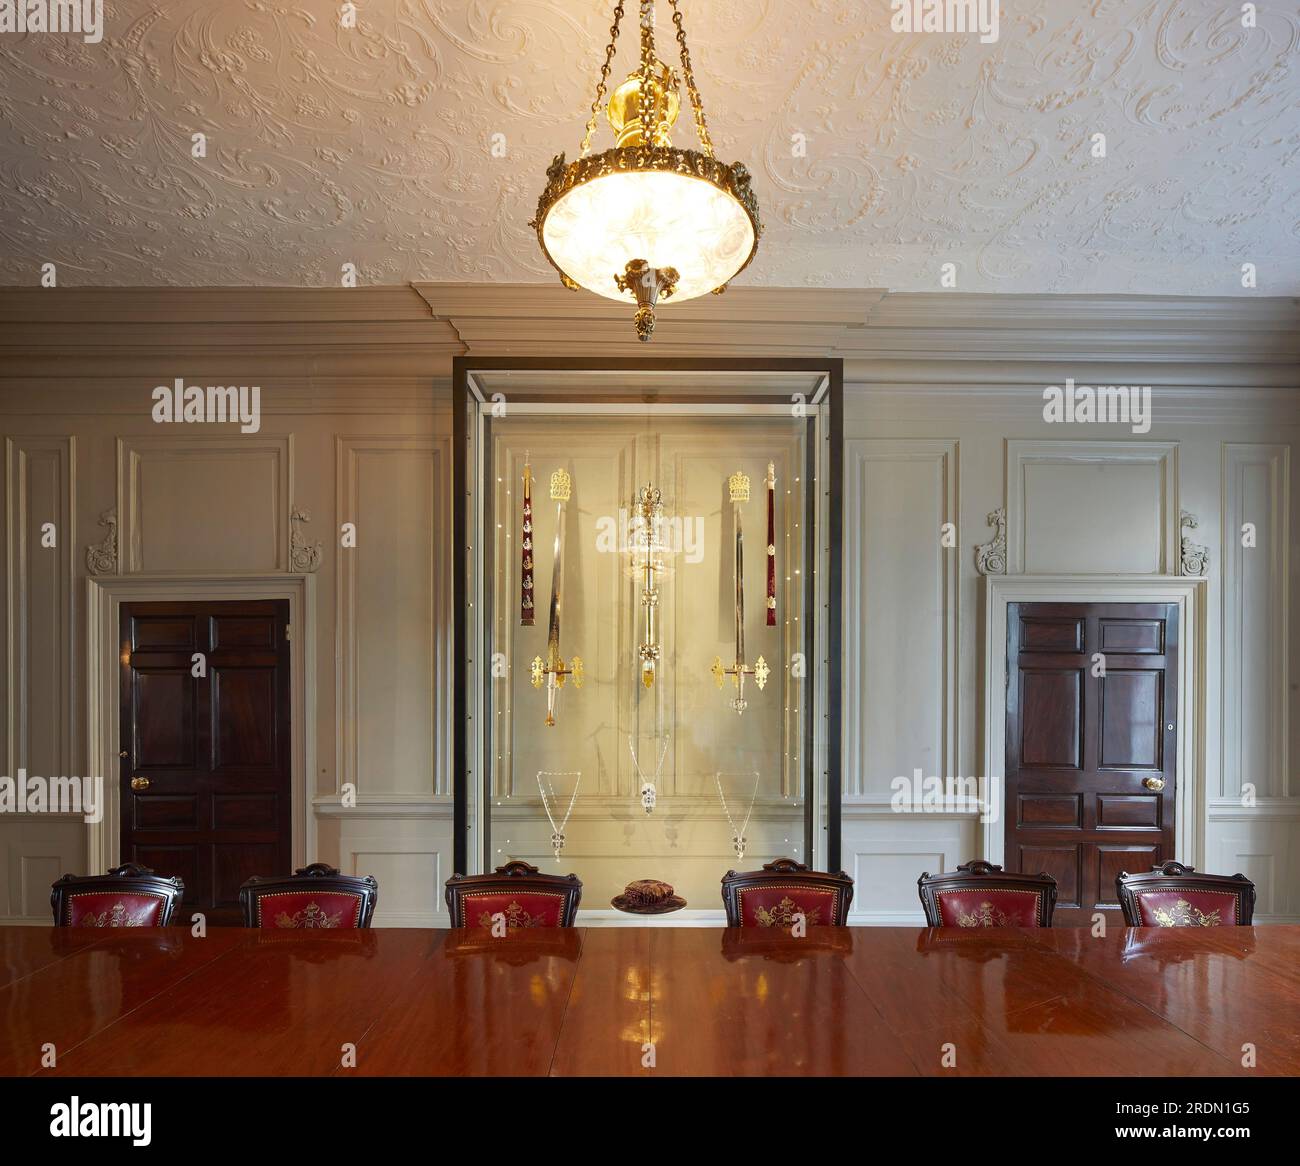 Conference room with display of ceremonial swords and the Mayors Mace. York Mansion House, York, United Kingdom. Architect: De Matos Ryan, 2018. Stock Photo